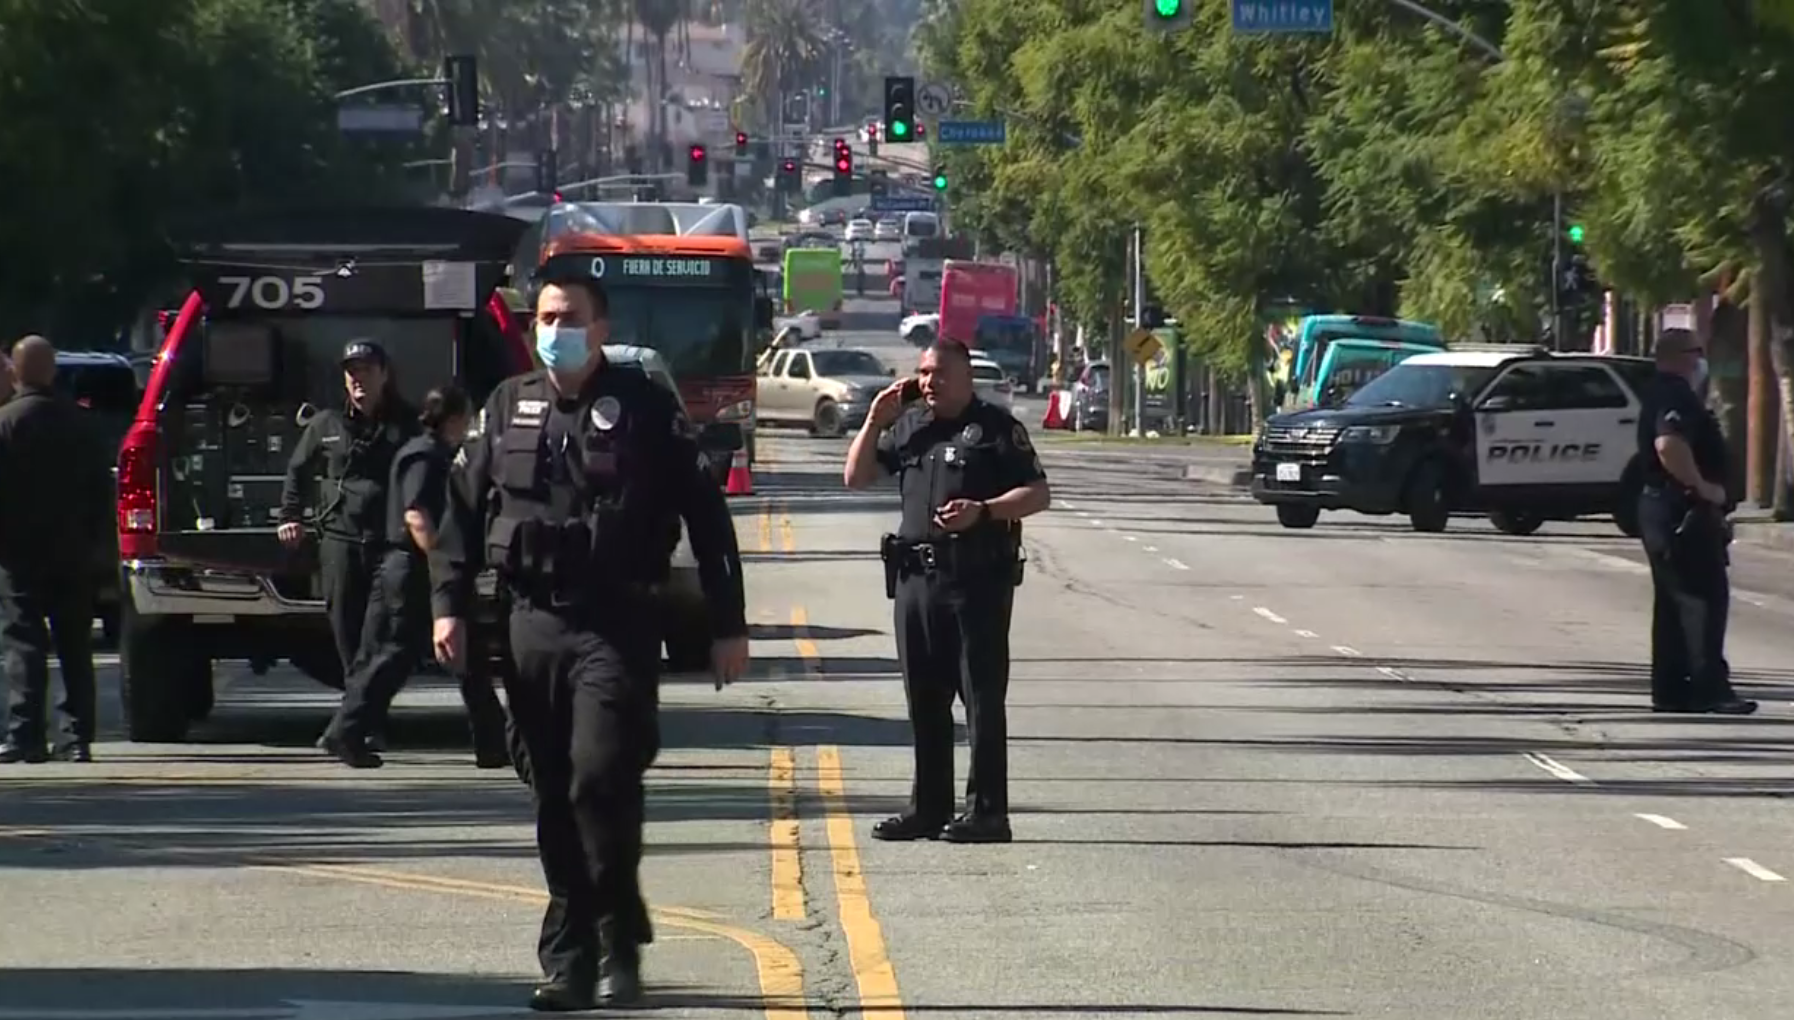 LAPD Standoff Ends After Suspect Dies Of Self-Inflicted Gunshot Wound – CBS Los Angeles